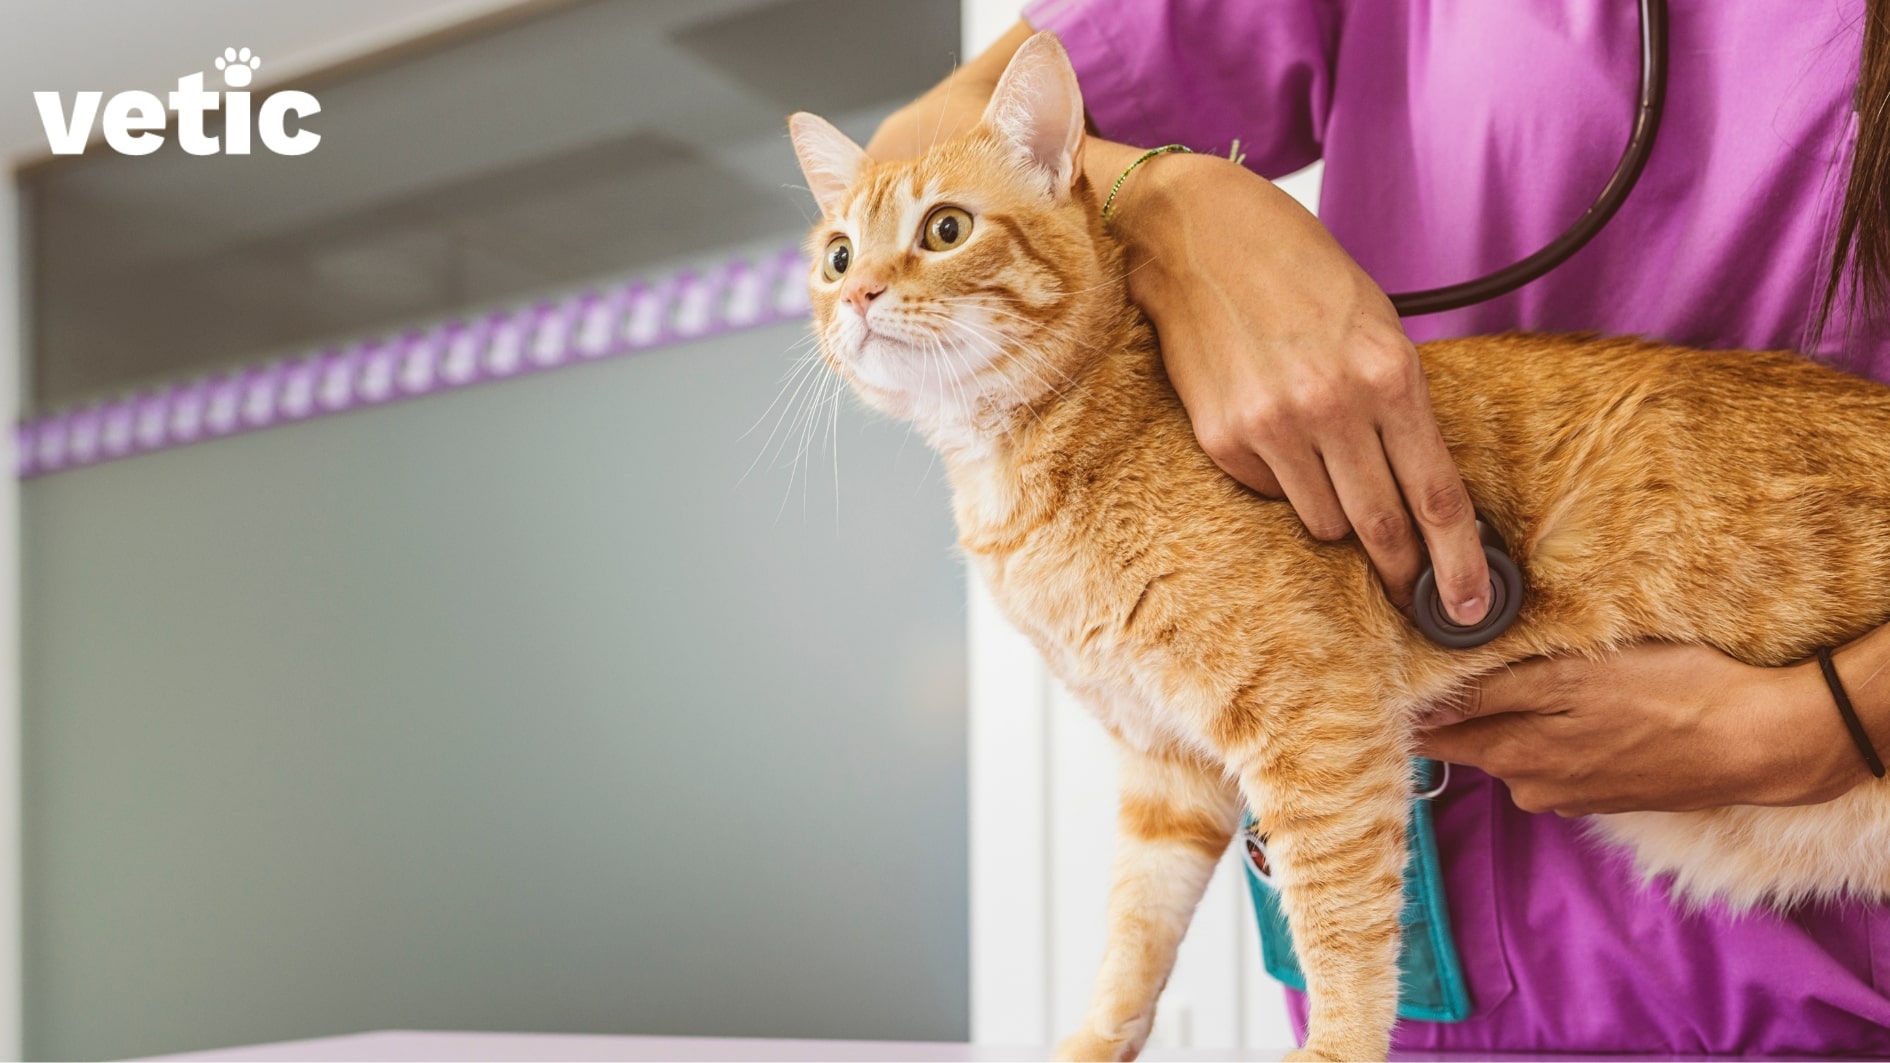 Orange tabby on the examination table held nu a veterinarian wearing magenta scrubs. the veterinarian is checking their heart health using a stethoscope. New cat owners must not forget that health checkups are mandatory for kittens and cats, at least twice a year.